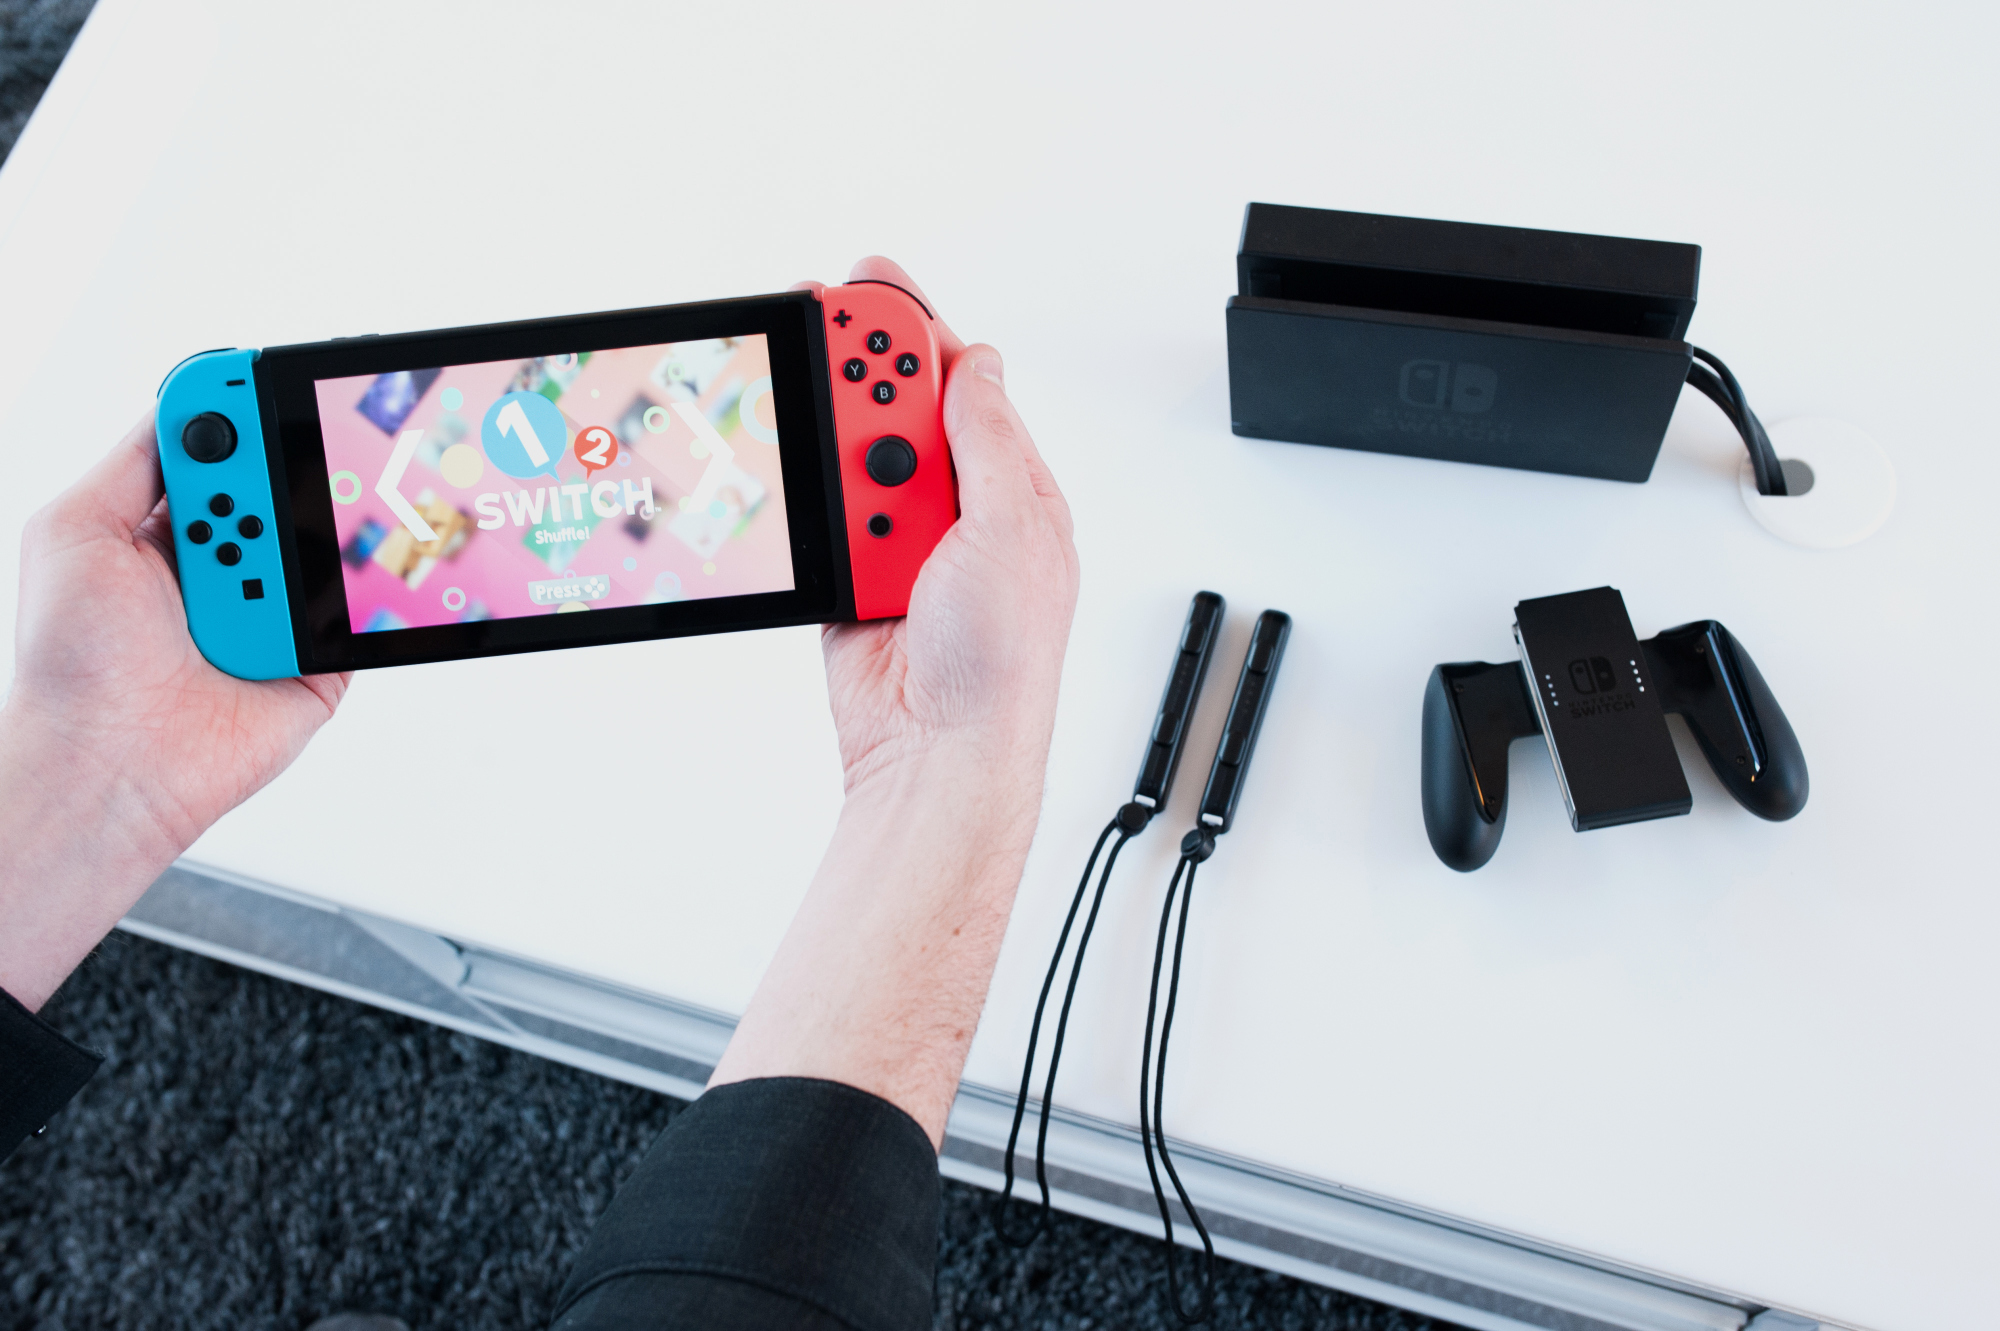 5 Reasons Why Nintendo Switch Is Much Better Than Wii U – Scout Life  magazine